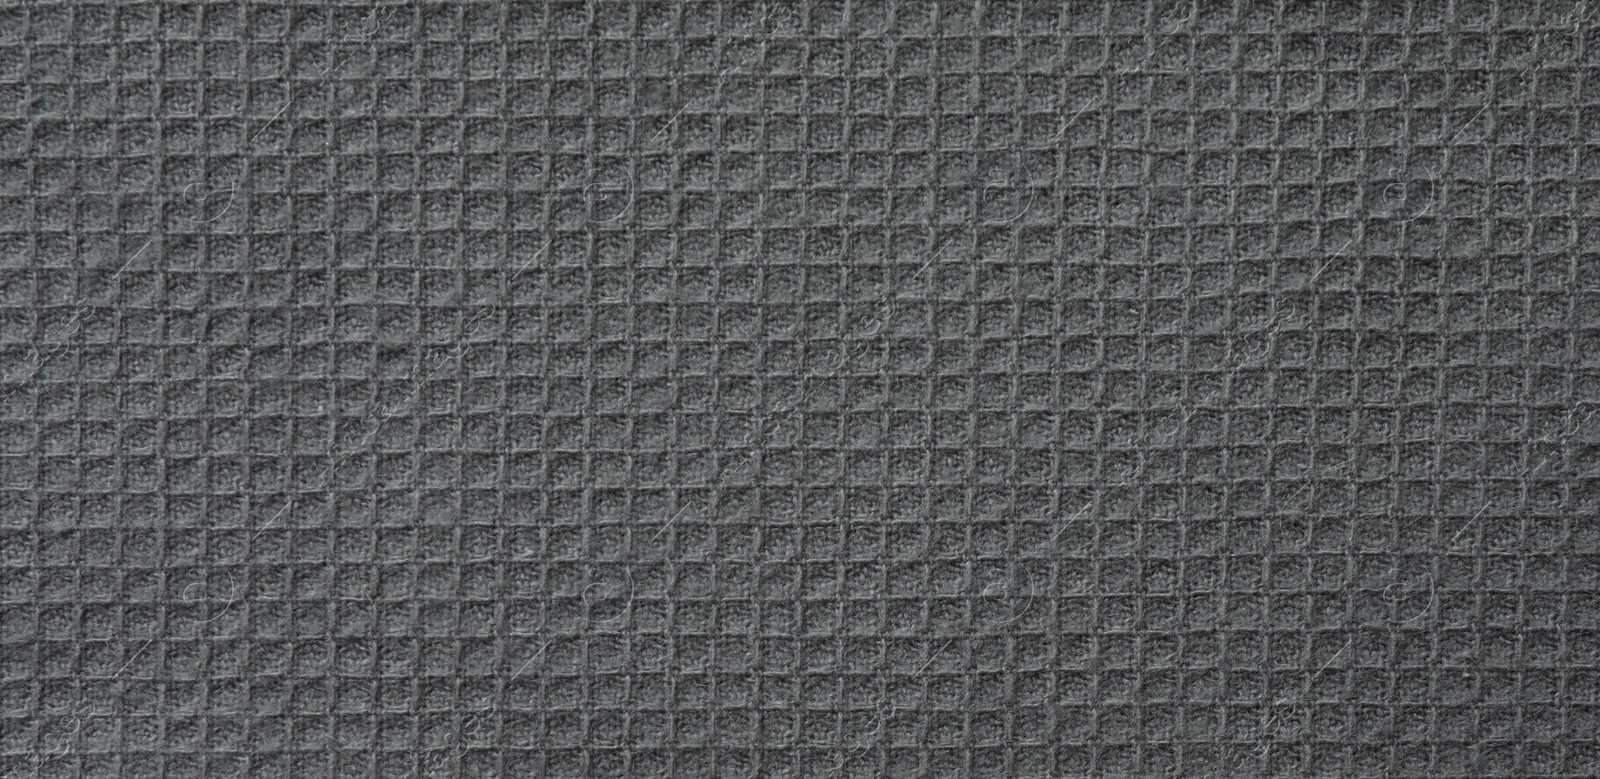 Photo of Texture of grey knitted fabric as background, top view